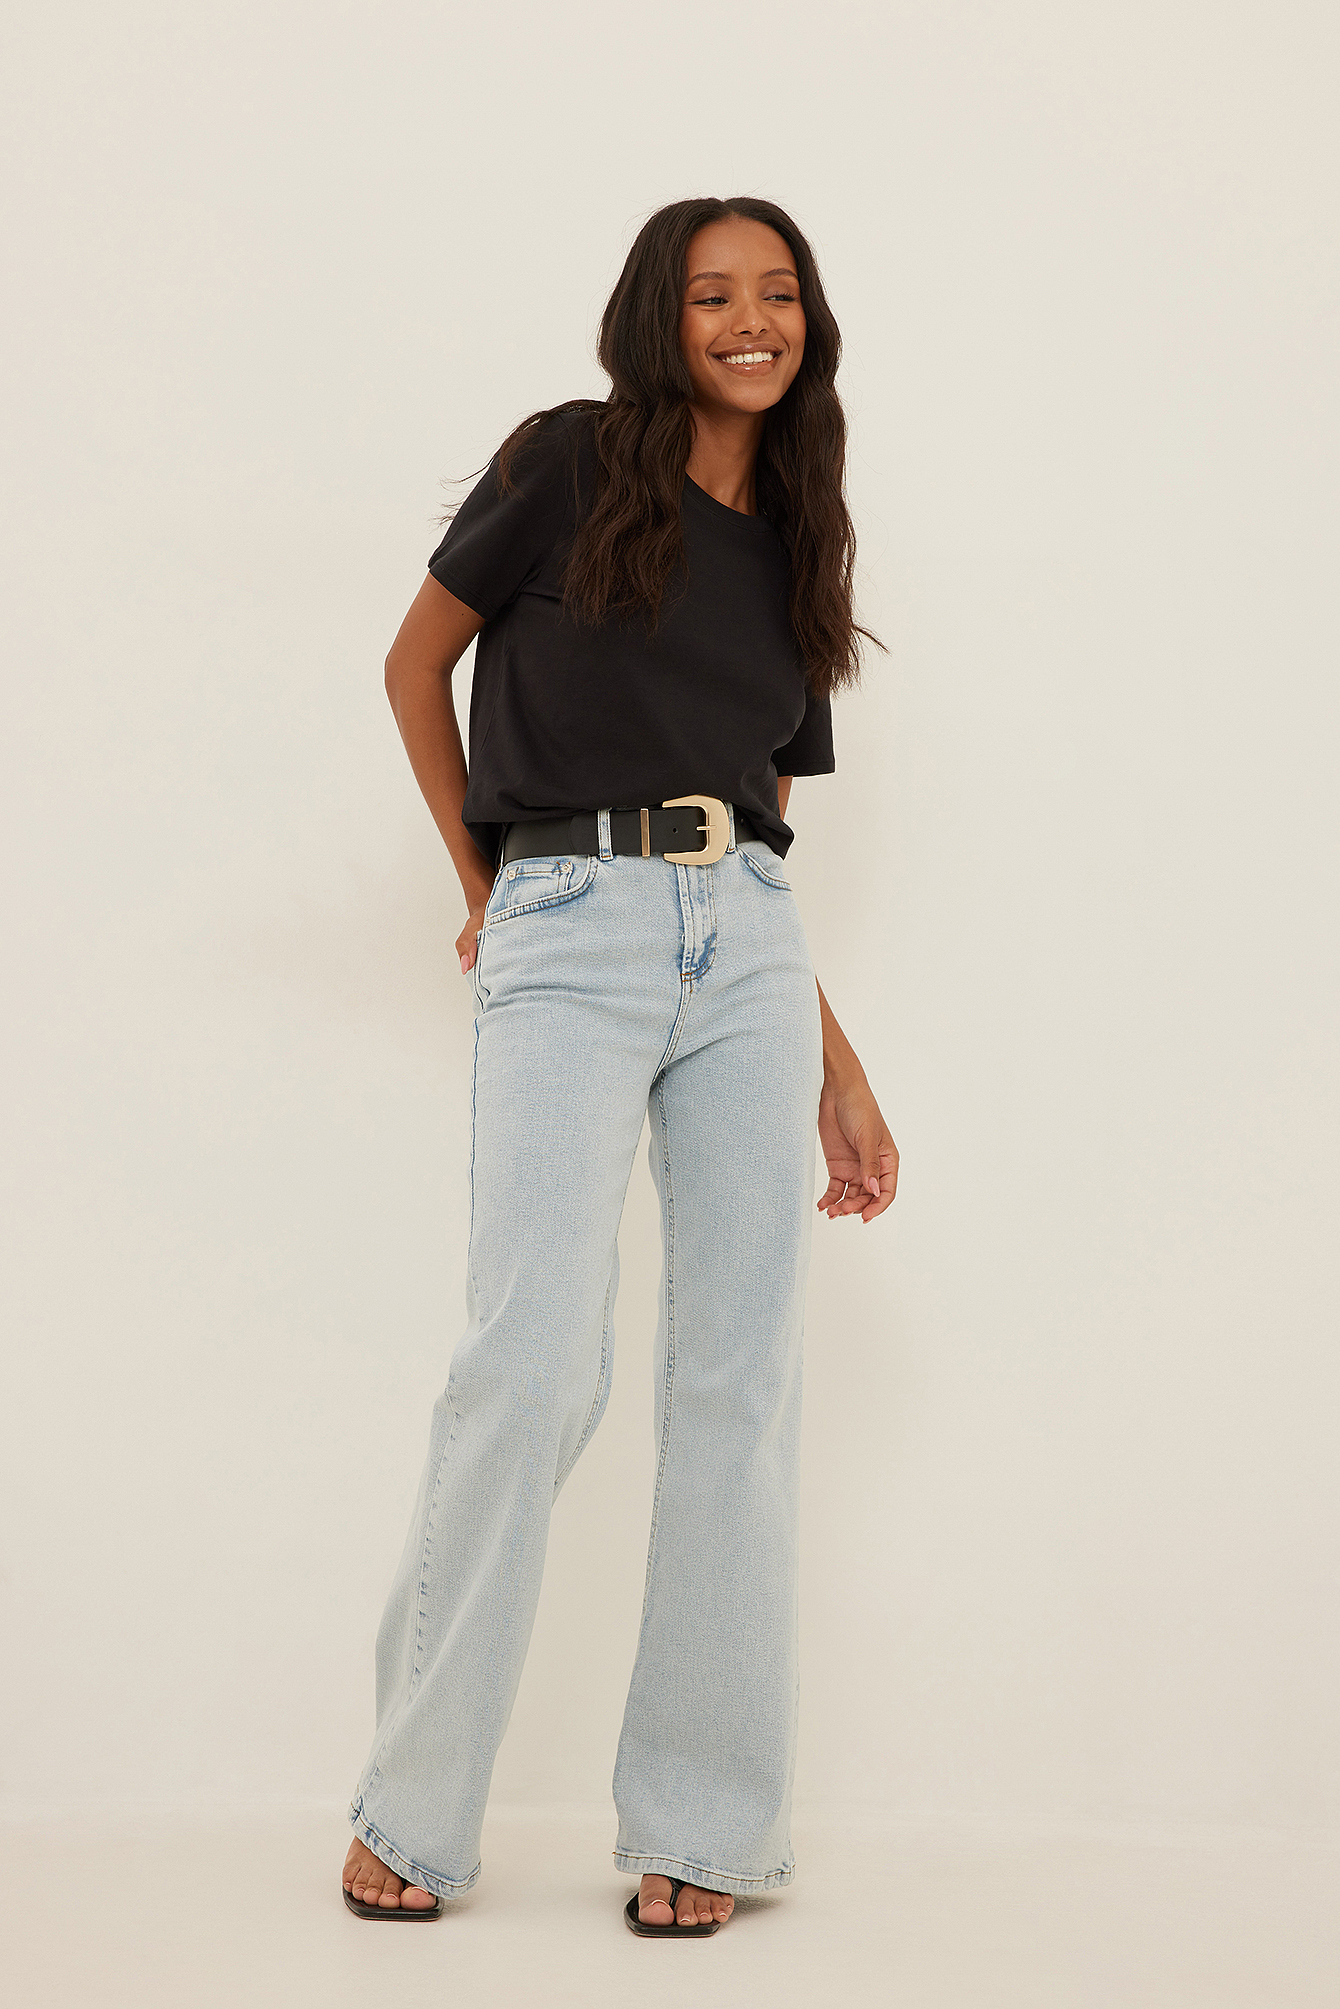 Relaxed Bootcut Fit Jeans Outfit